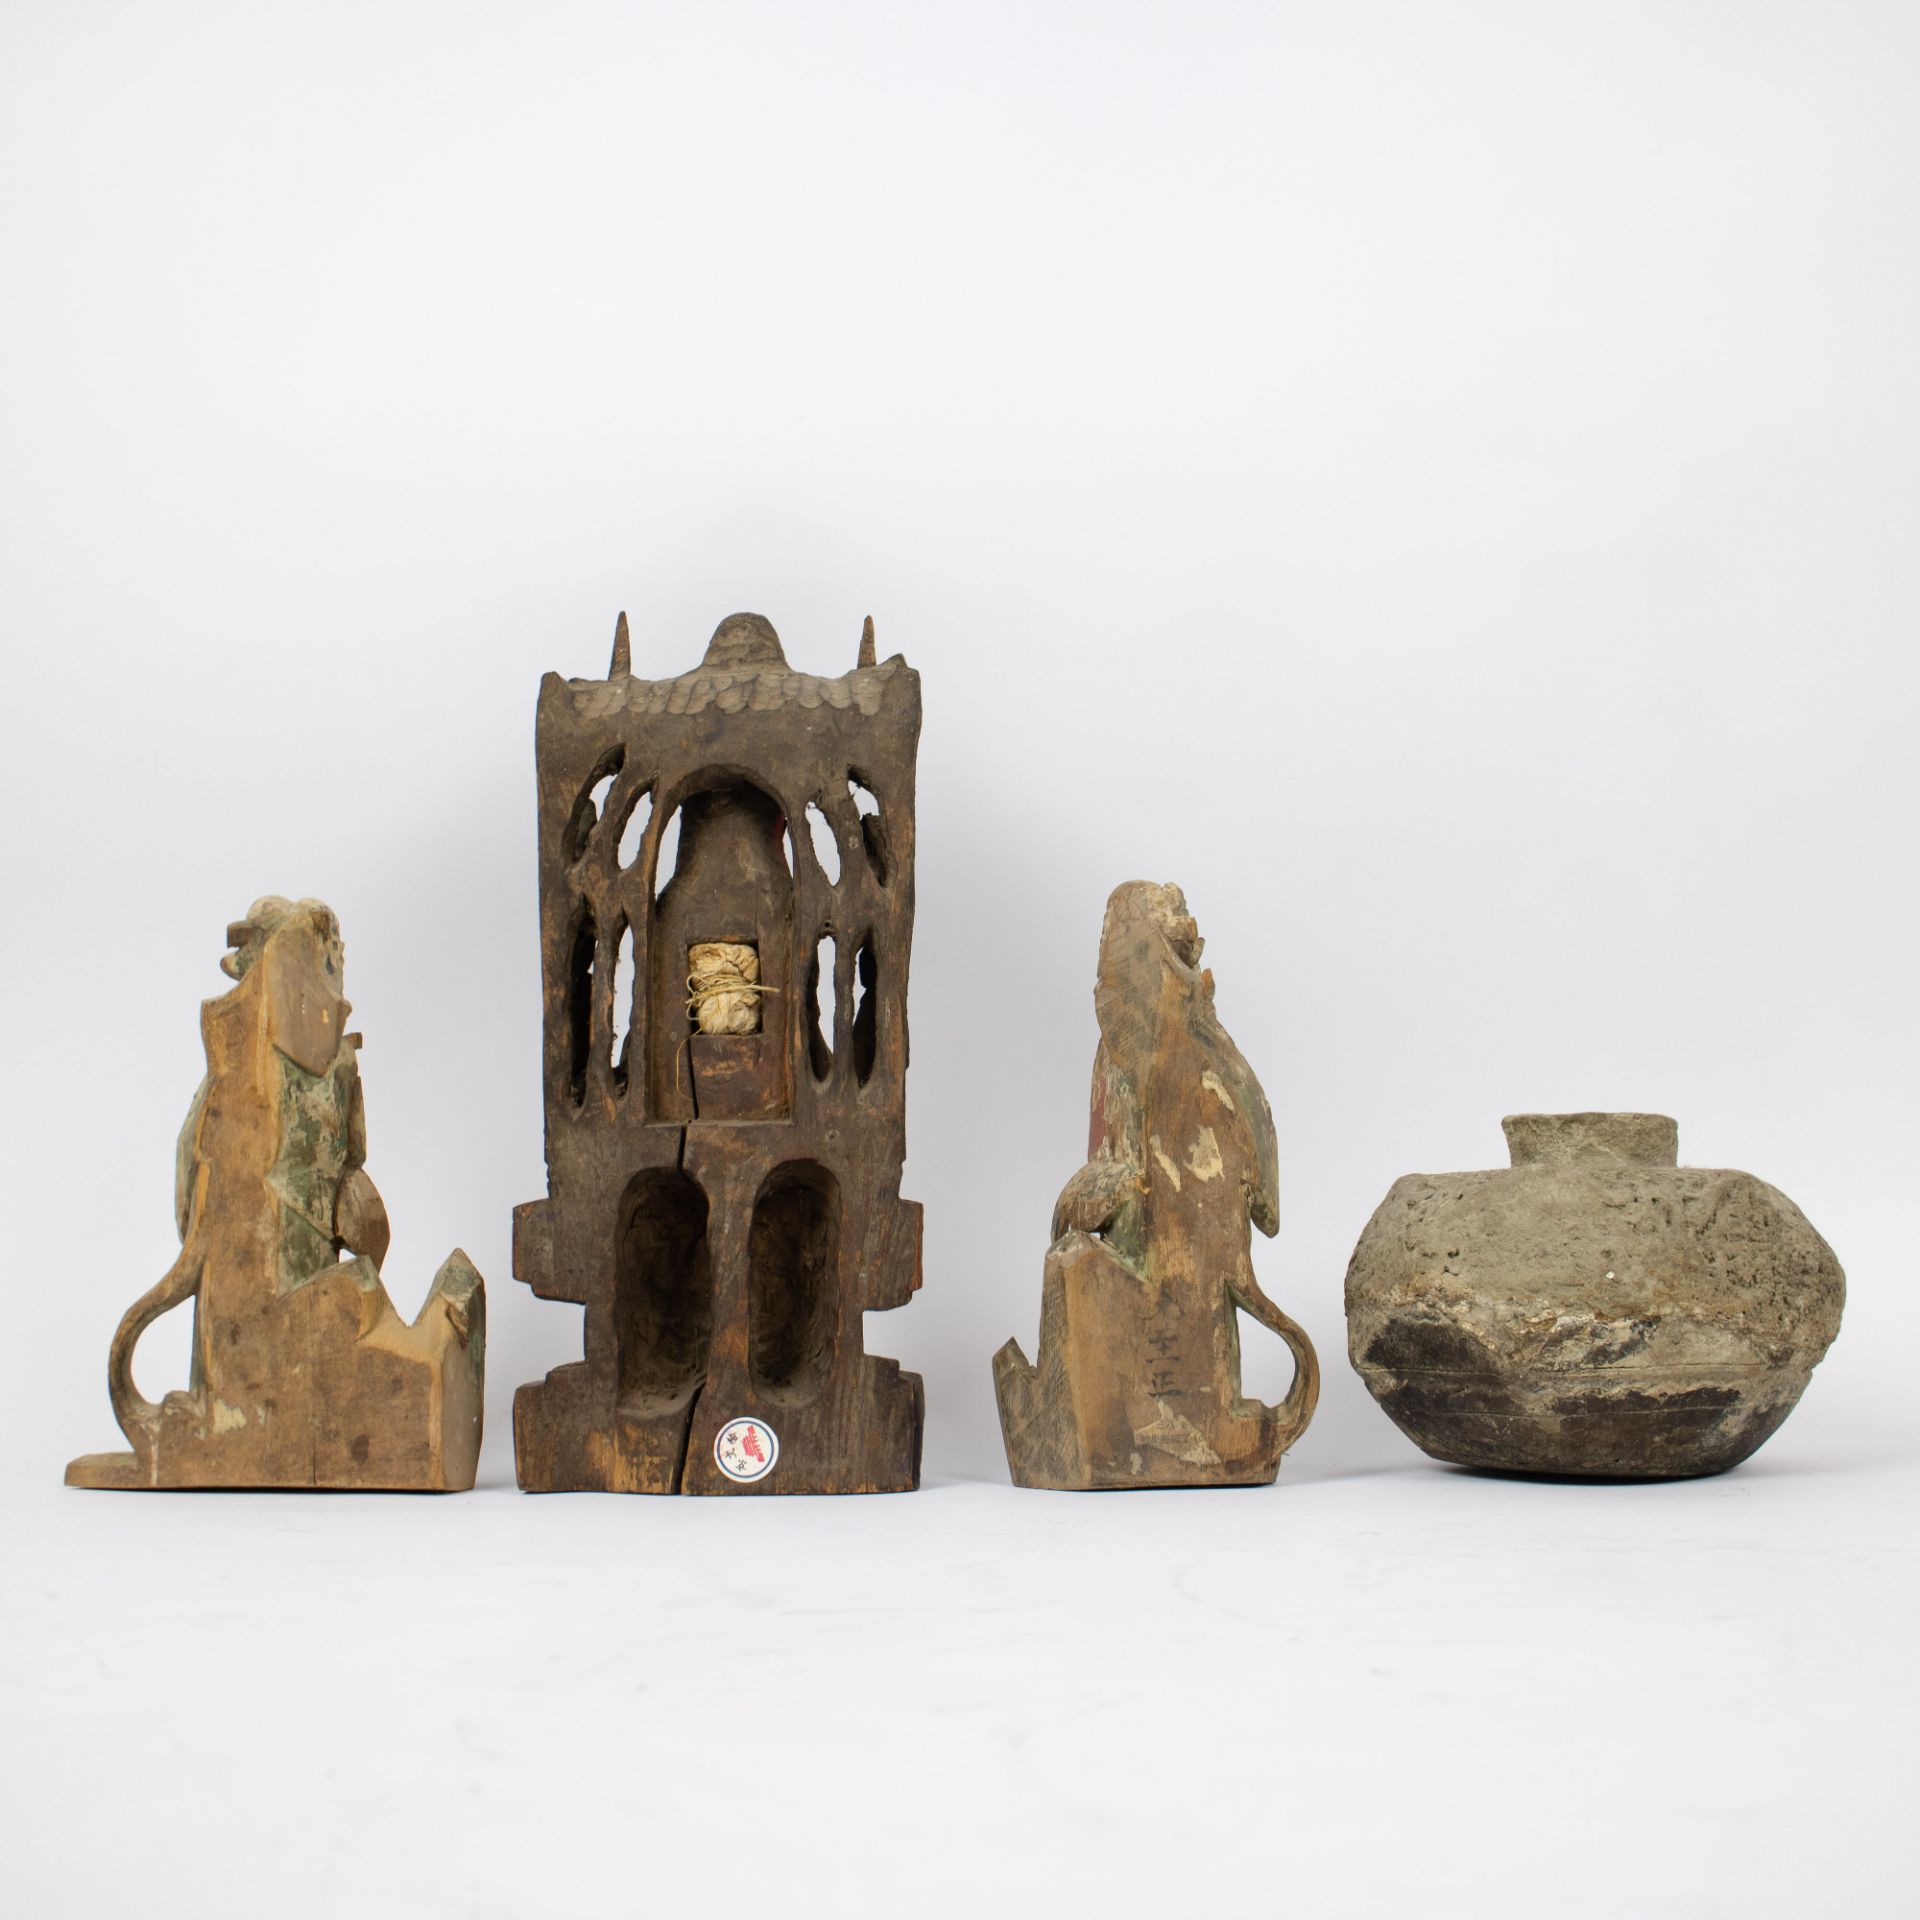 3 polychrome wood carving figurines and a stoneware vessel - Image 2 of 3